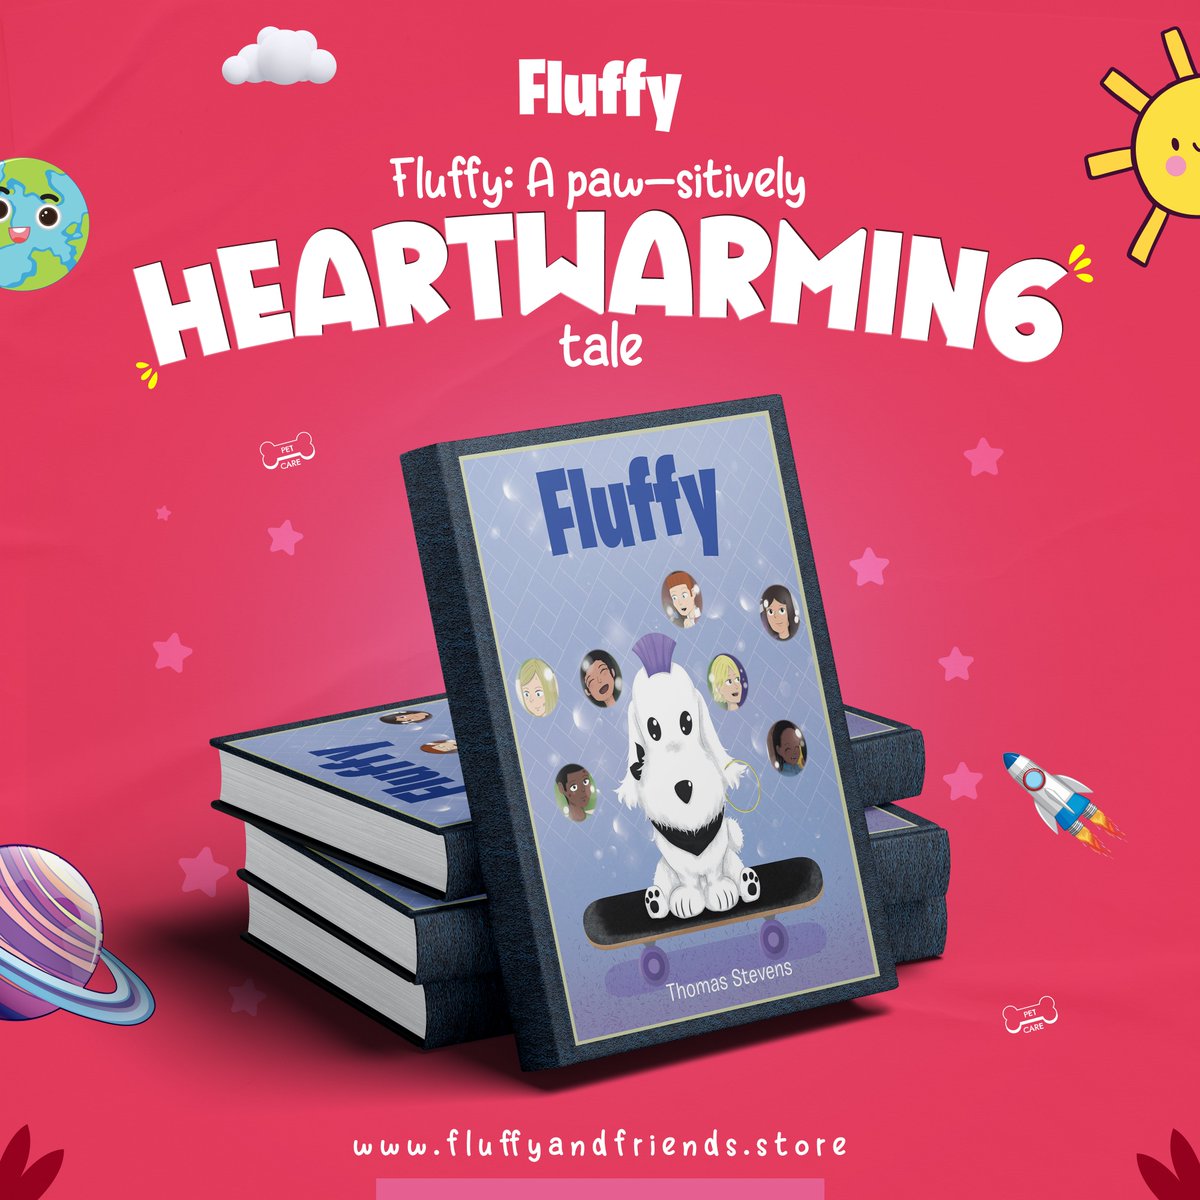 Let 'Fluffy's' magic loose! Get your paws on 'Fluffy' now! fluffyandfriends.store #Fluffy #ThomasStevens #FluffyAndFriends #inclusivity #ShamelessSelfpromoMonday #writerslift #booktwt #friendshipgoals #friendships #author #childrensbook #reading #readingtime #currentlyreading